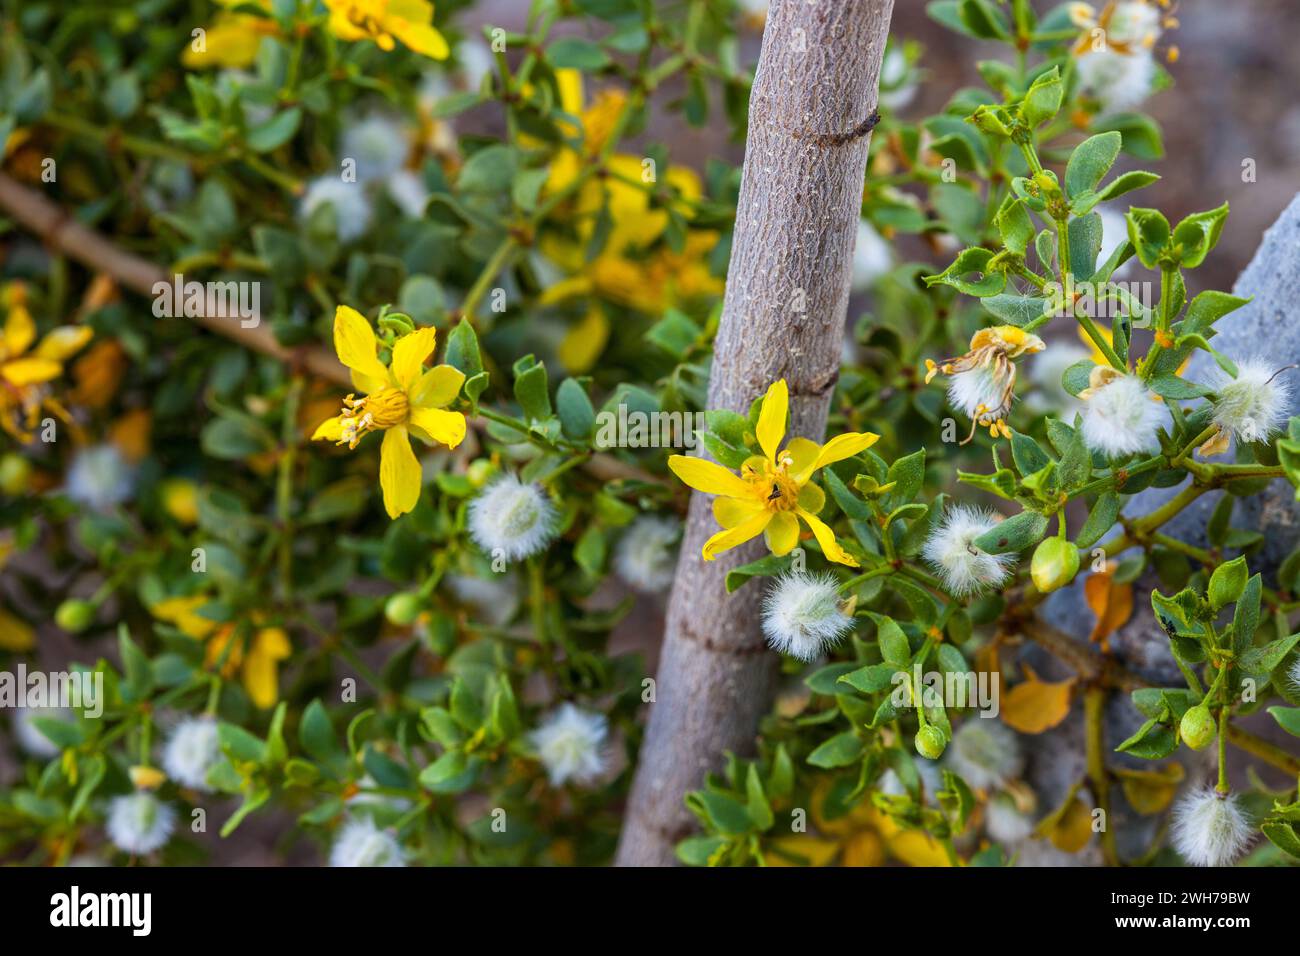 Buds, flowers & seeds of Creosote Bush, Larrea tridentata, in the Mojave Desert in Death Valley National Park, California. Stock Photo